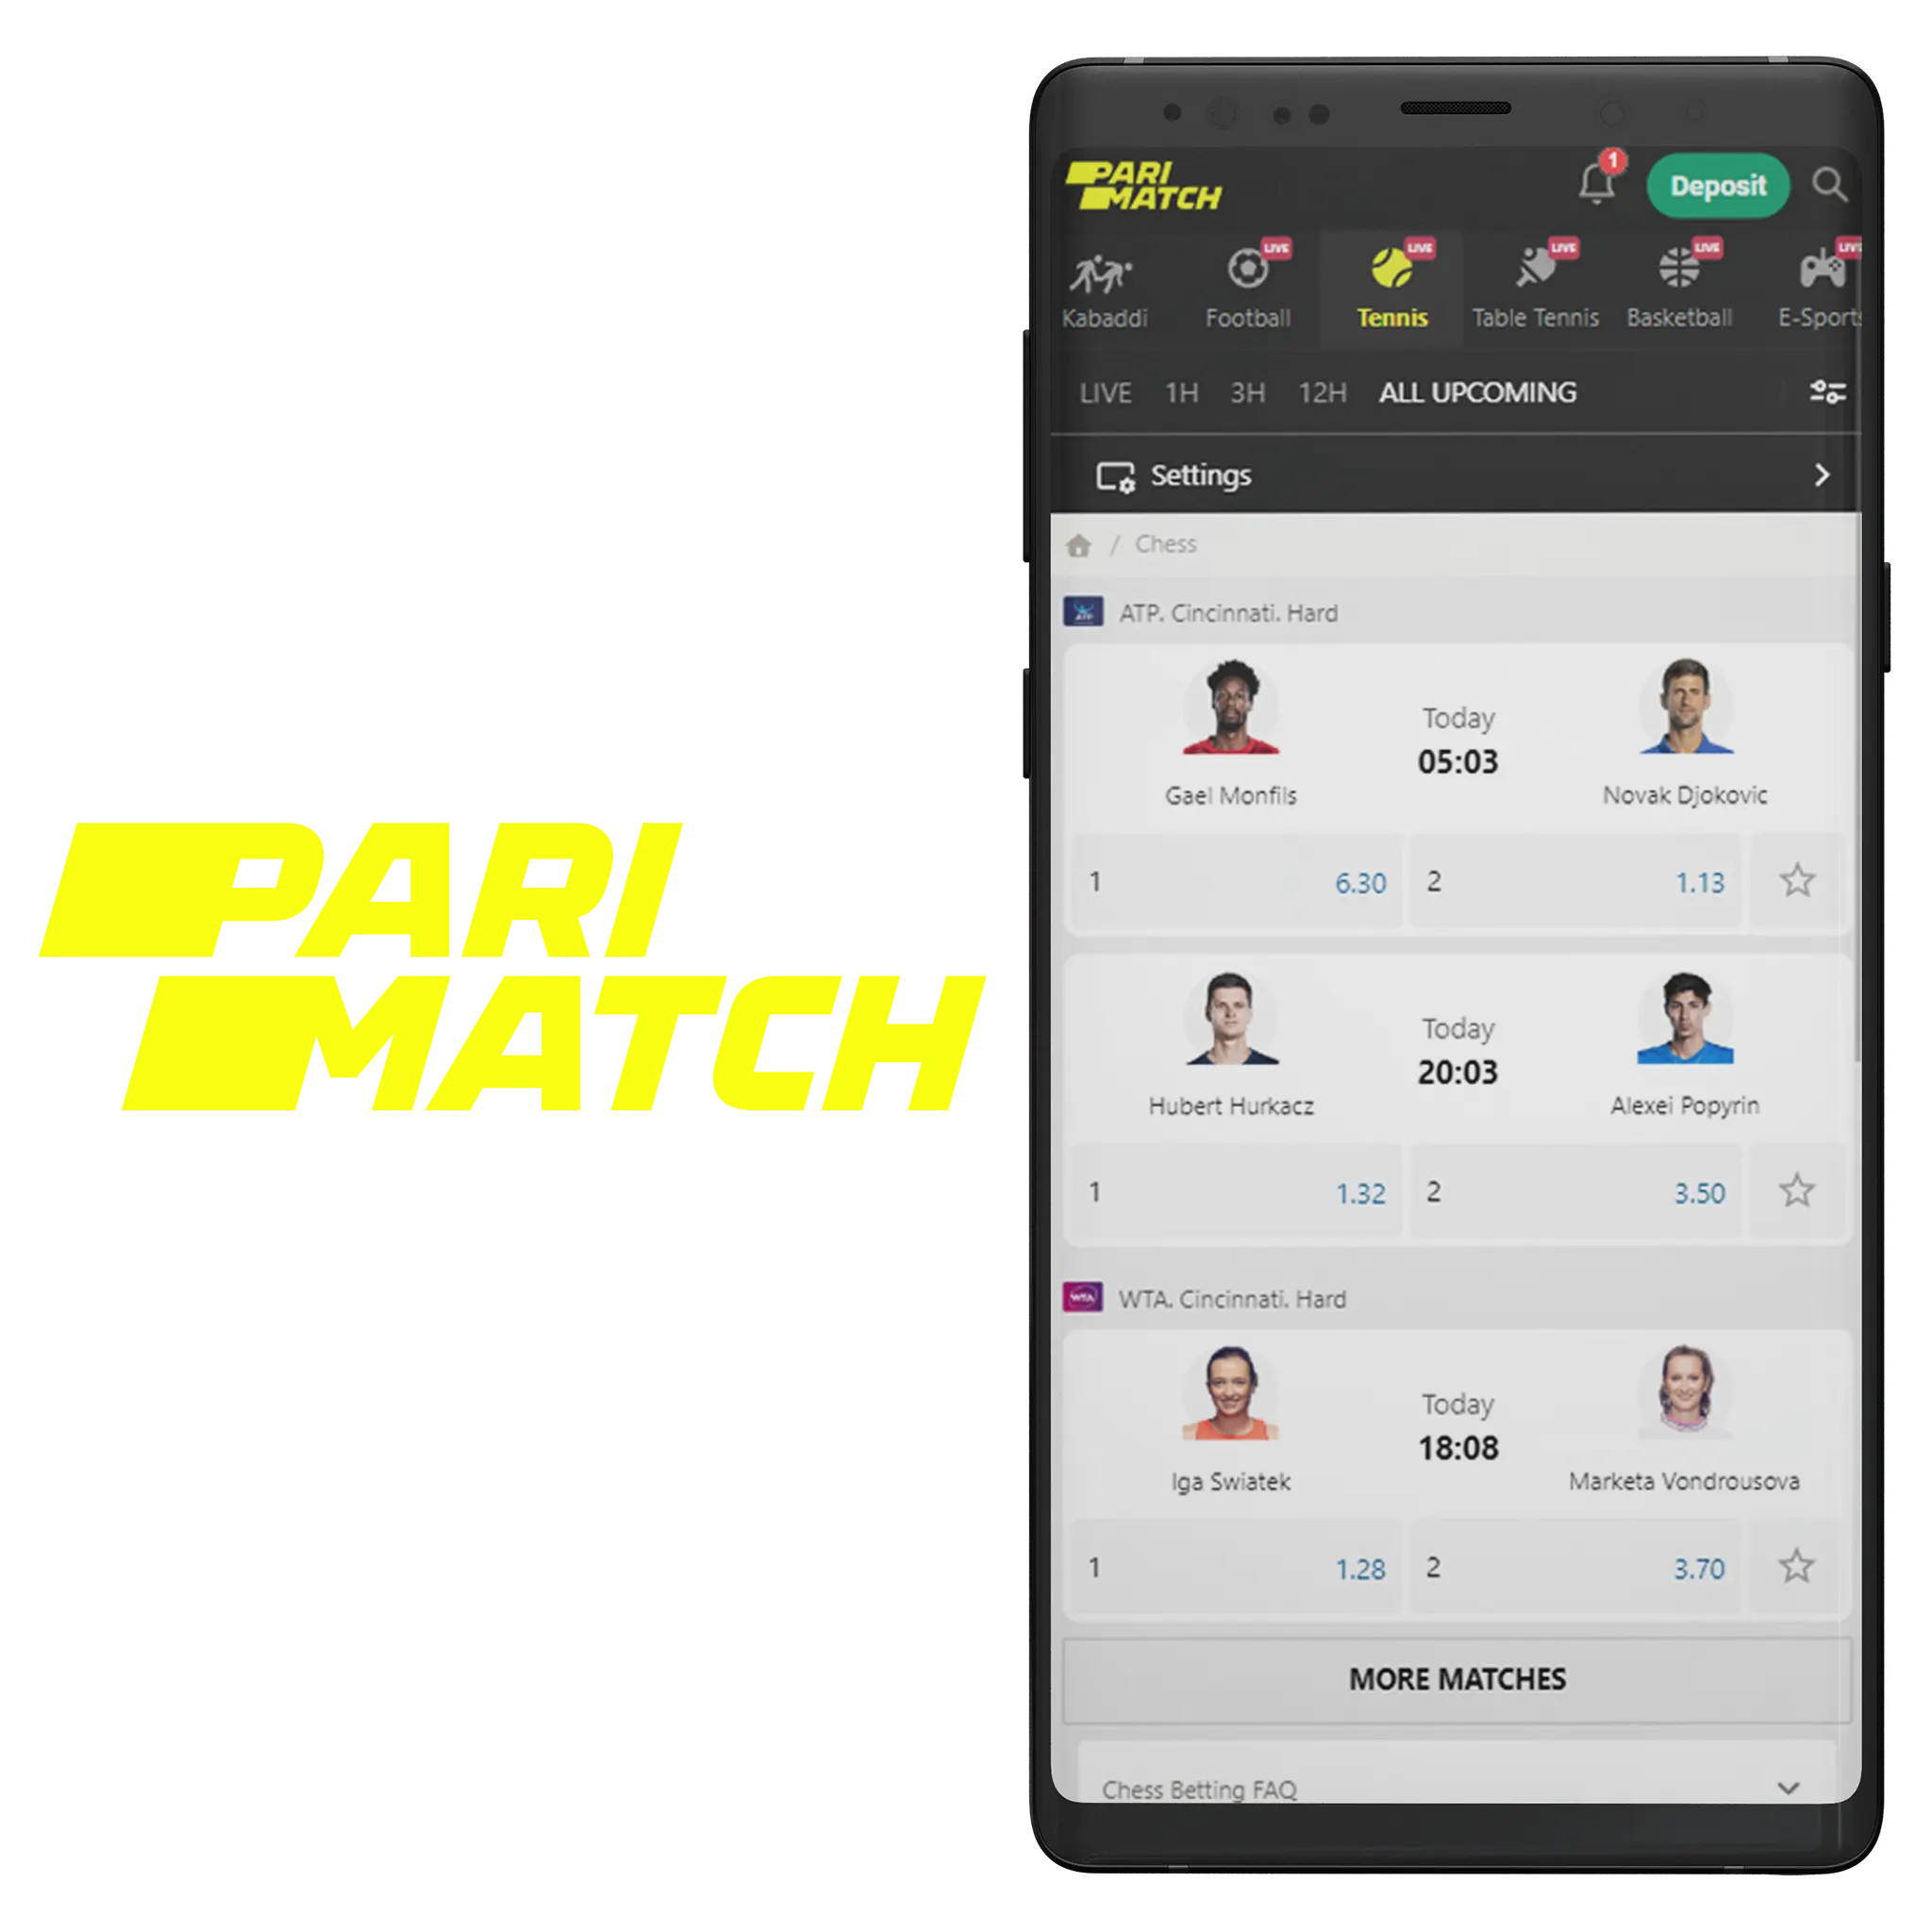 Parimatch mobile app is very convenient to place bets on tennis.